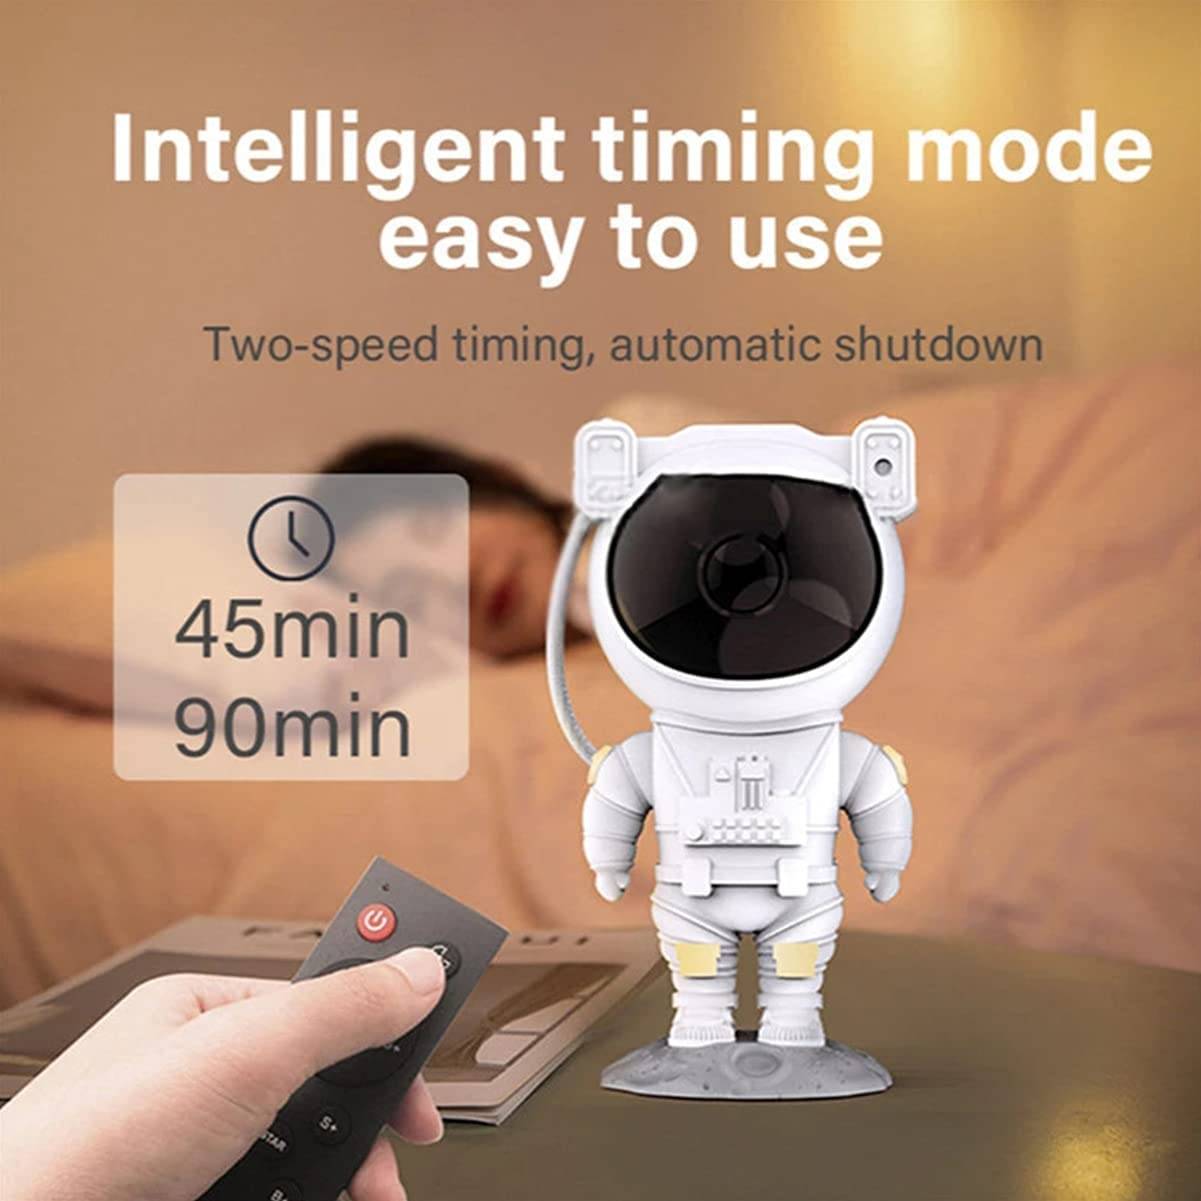 LED Galaxy Star Projector Kids Night Light Nebula Lamp Remote Rotating Astronaut Projector Lamp for Bedroom Home Decoration Gift Novelty Lightings